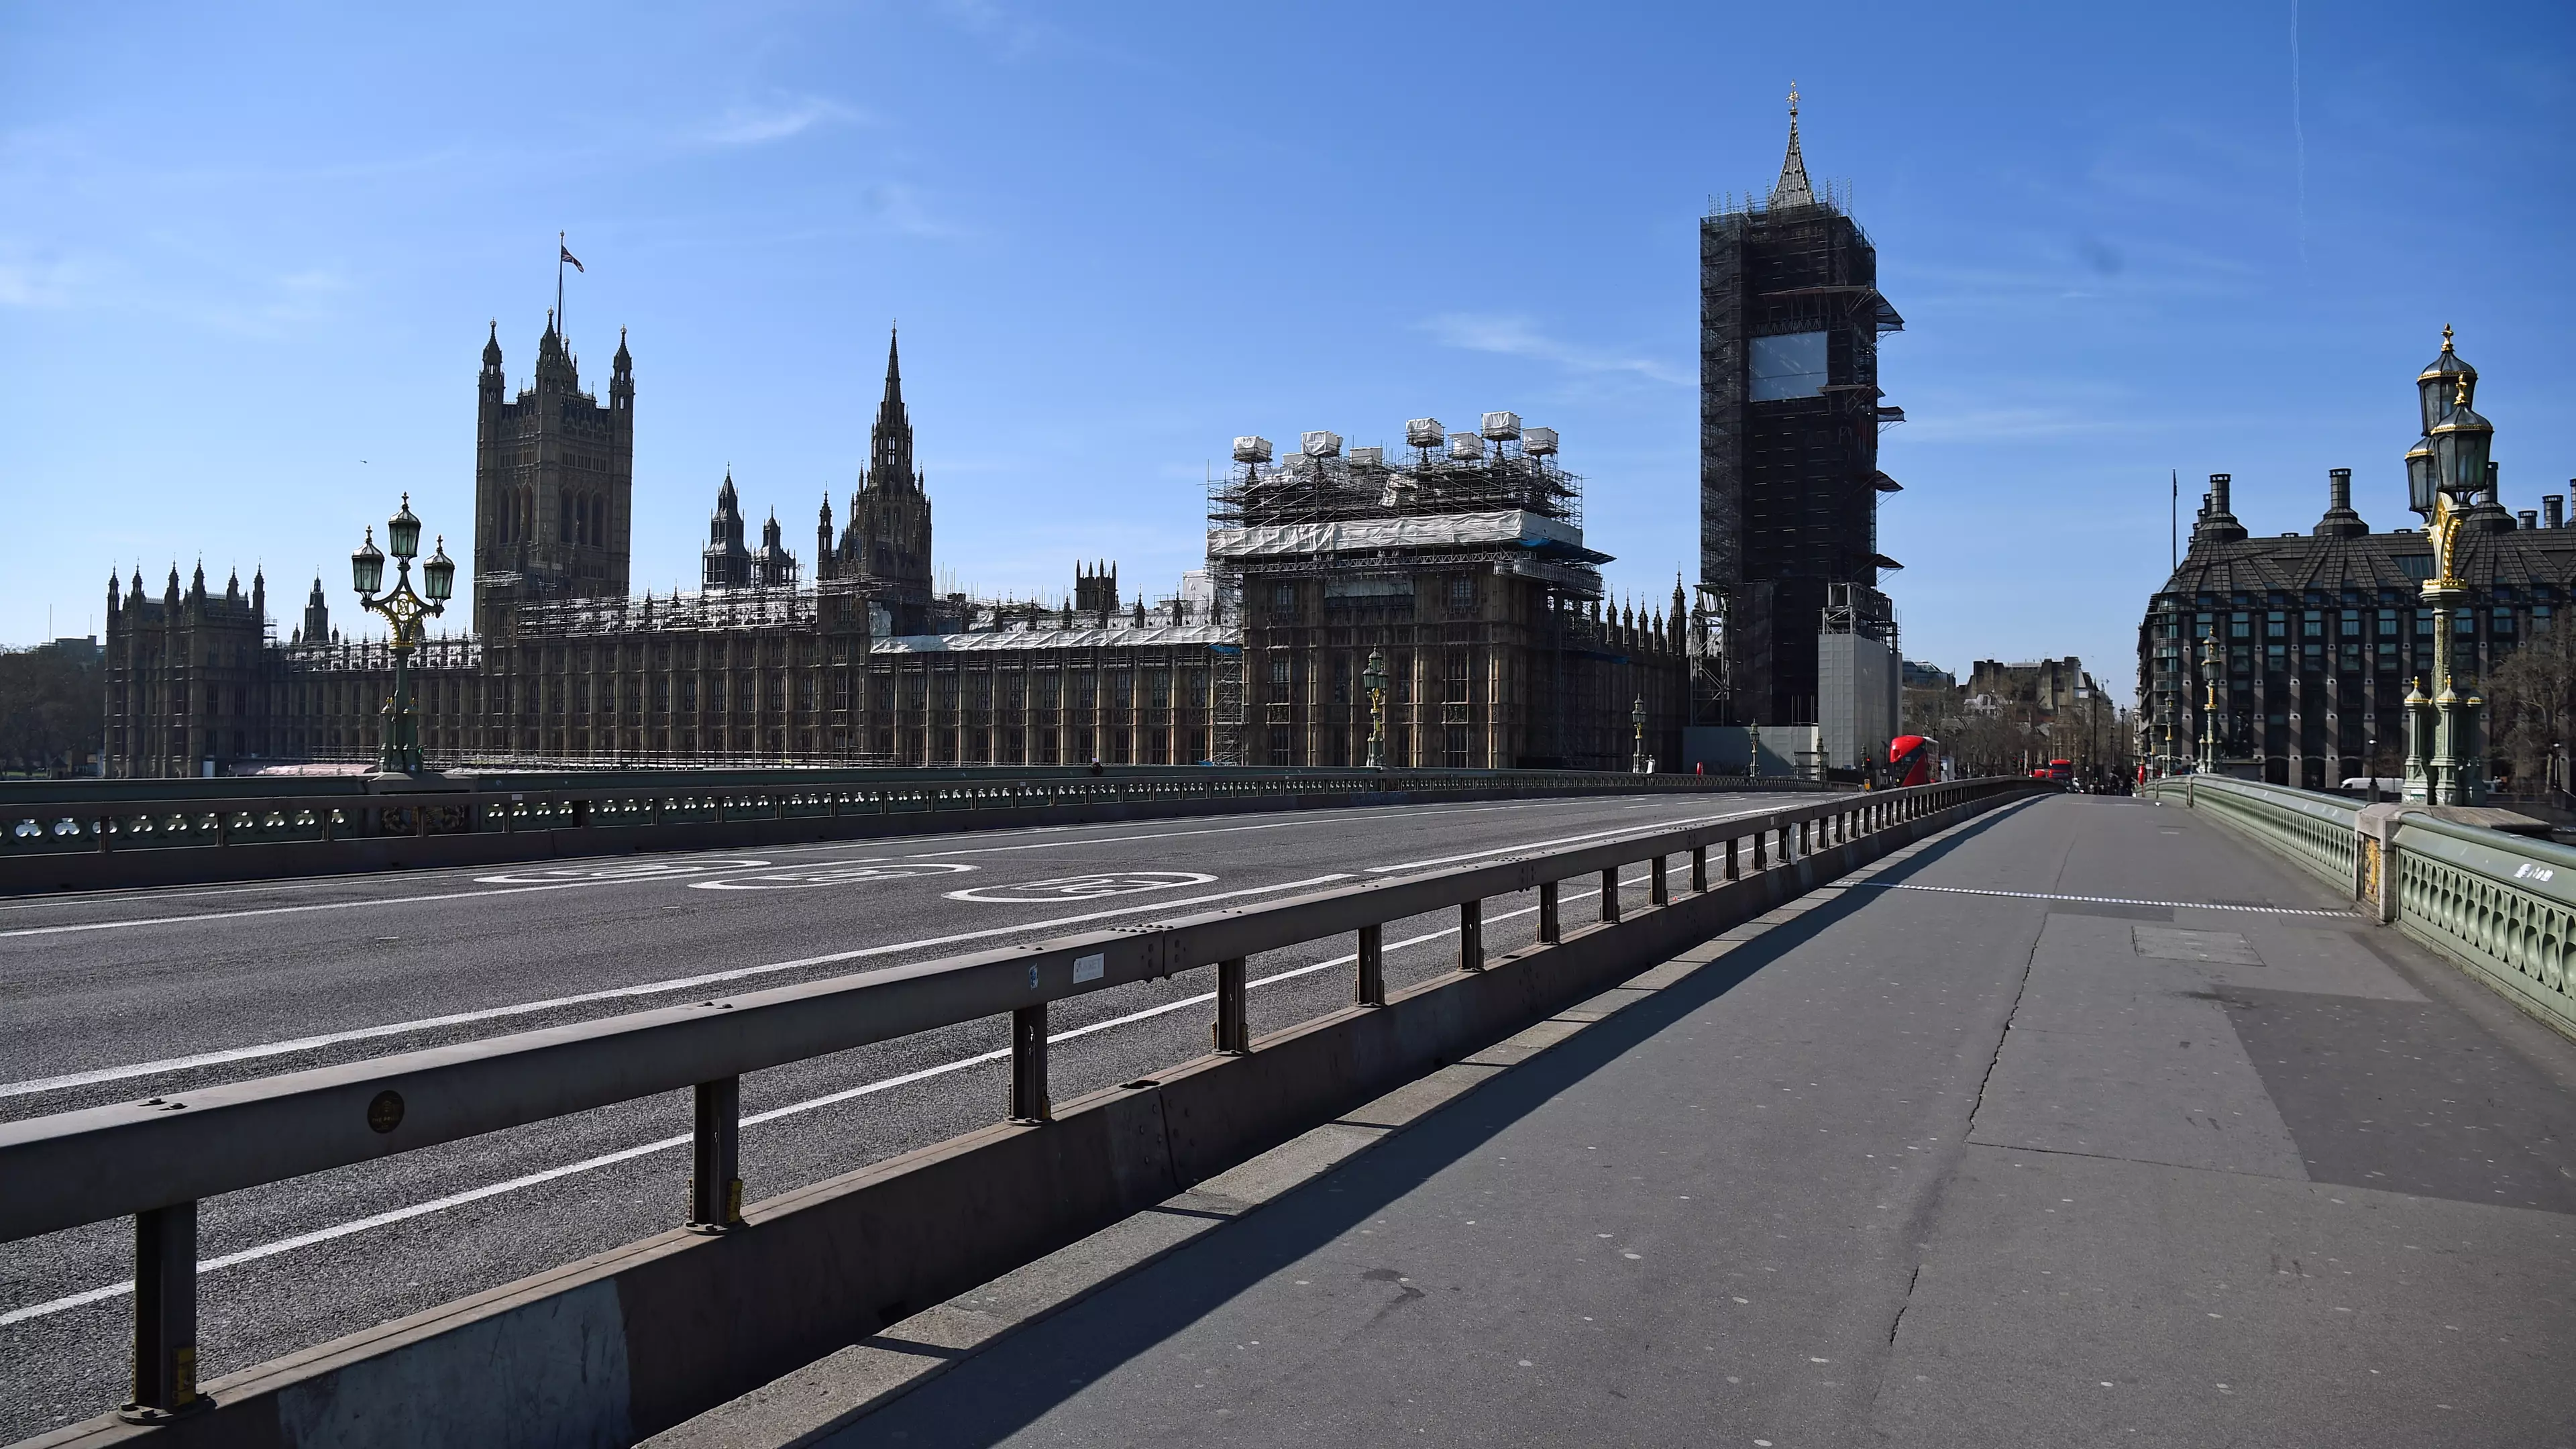 Photos Show A Deserted London As Residents Stay Inside